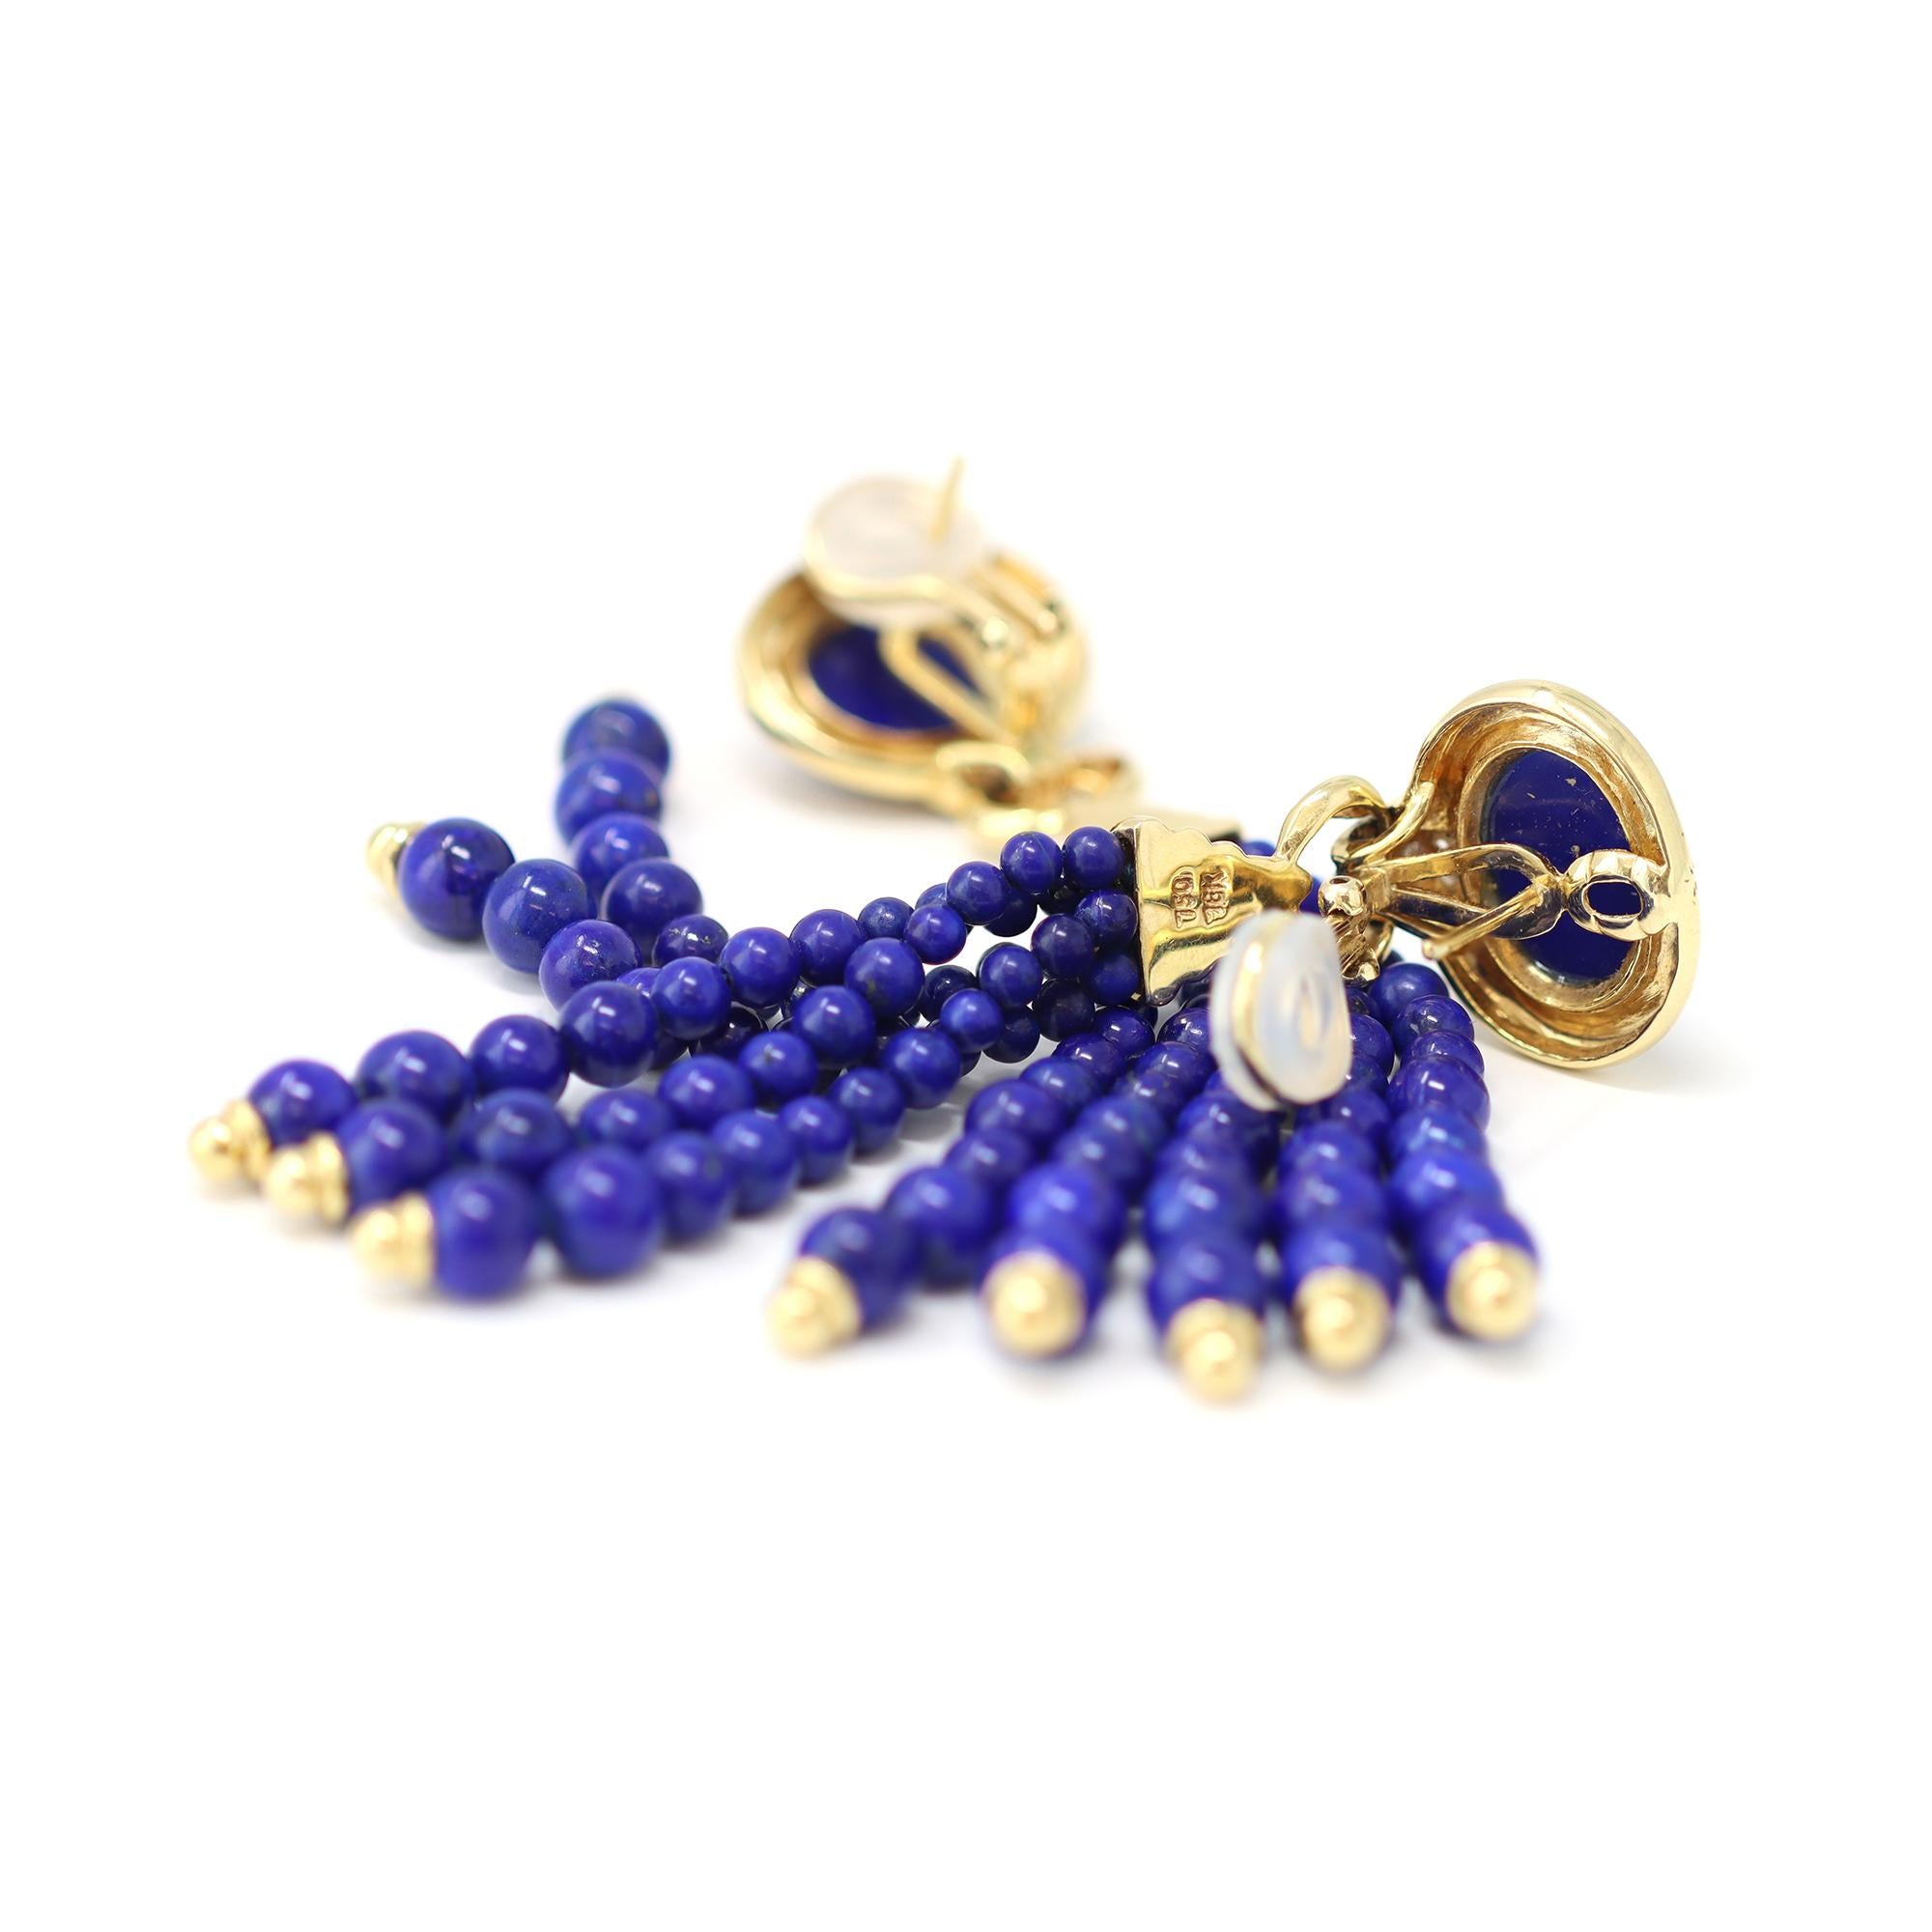 Pair of 18 Karat Yellow Gold Lapis Lazuli Tassel Bead Ear-Clips In Excellent Condition For Sale In Miami, FL